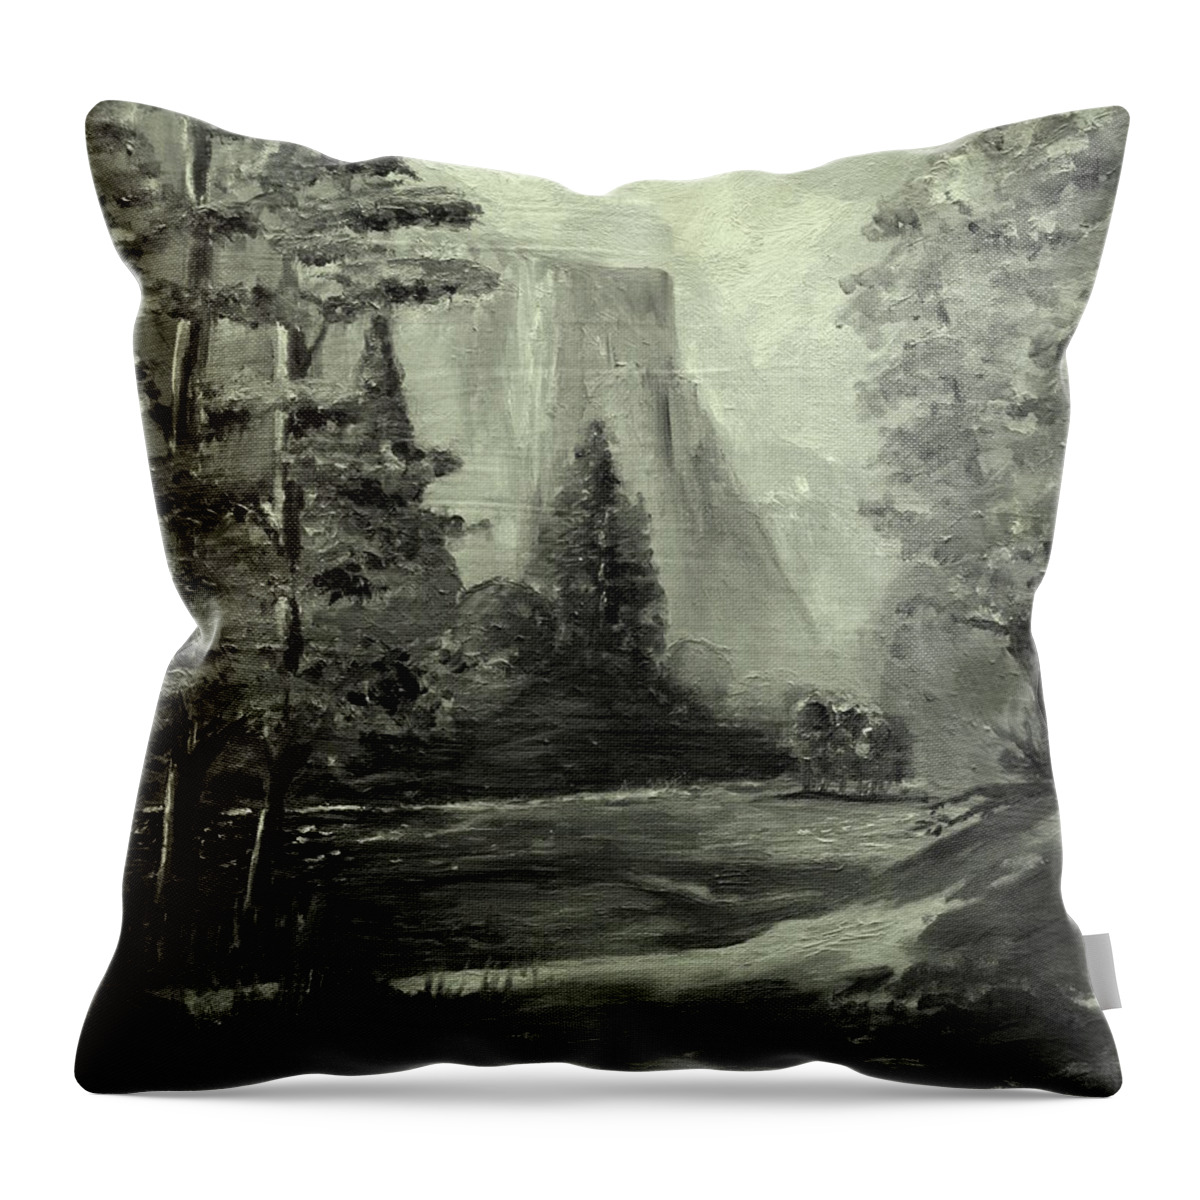 Landscape Throw Pillow featuring the painting Mountains by Julie Lueders 